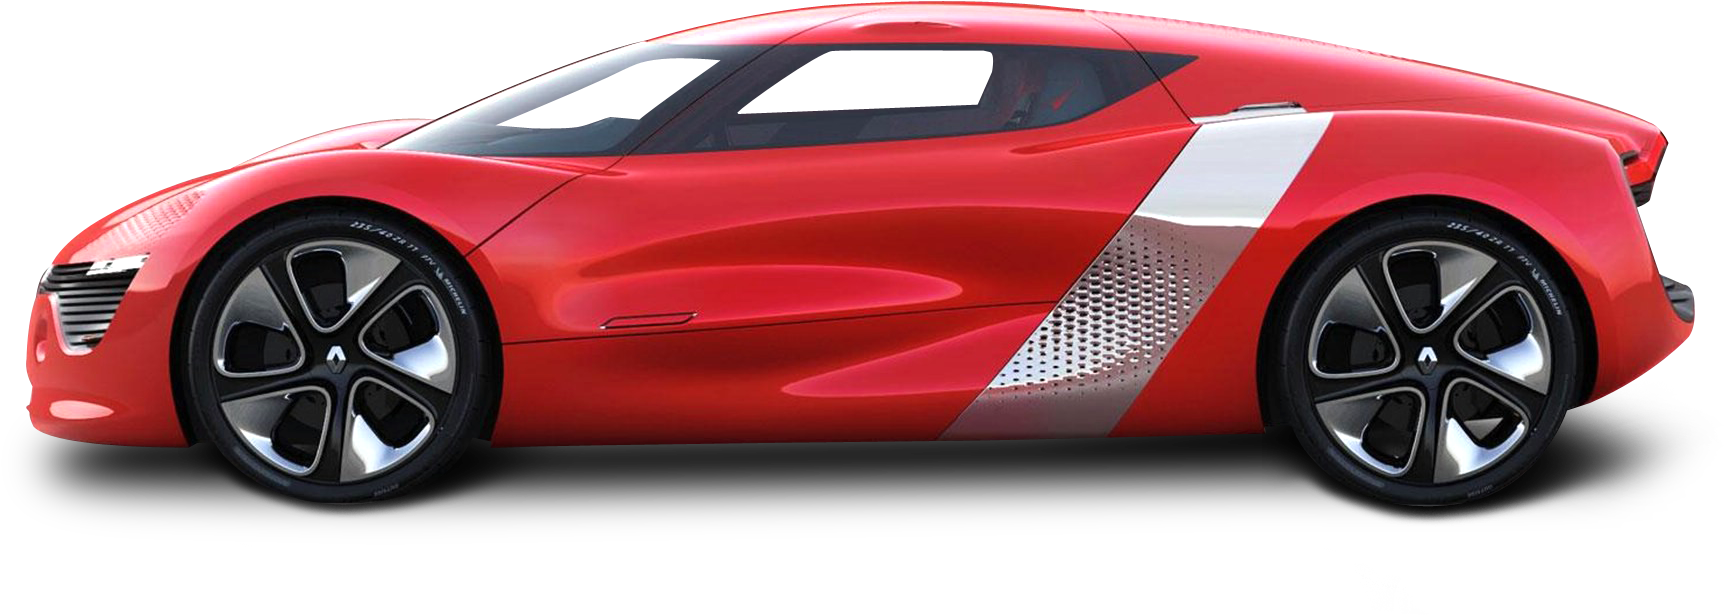 Red Renault Concept Car Side View